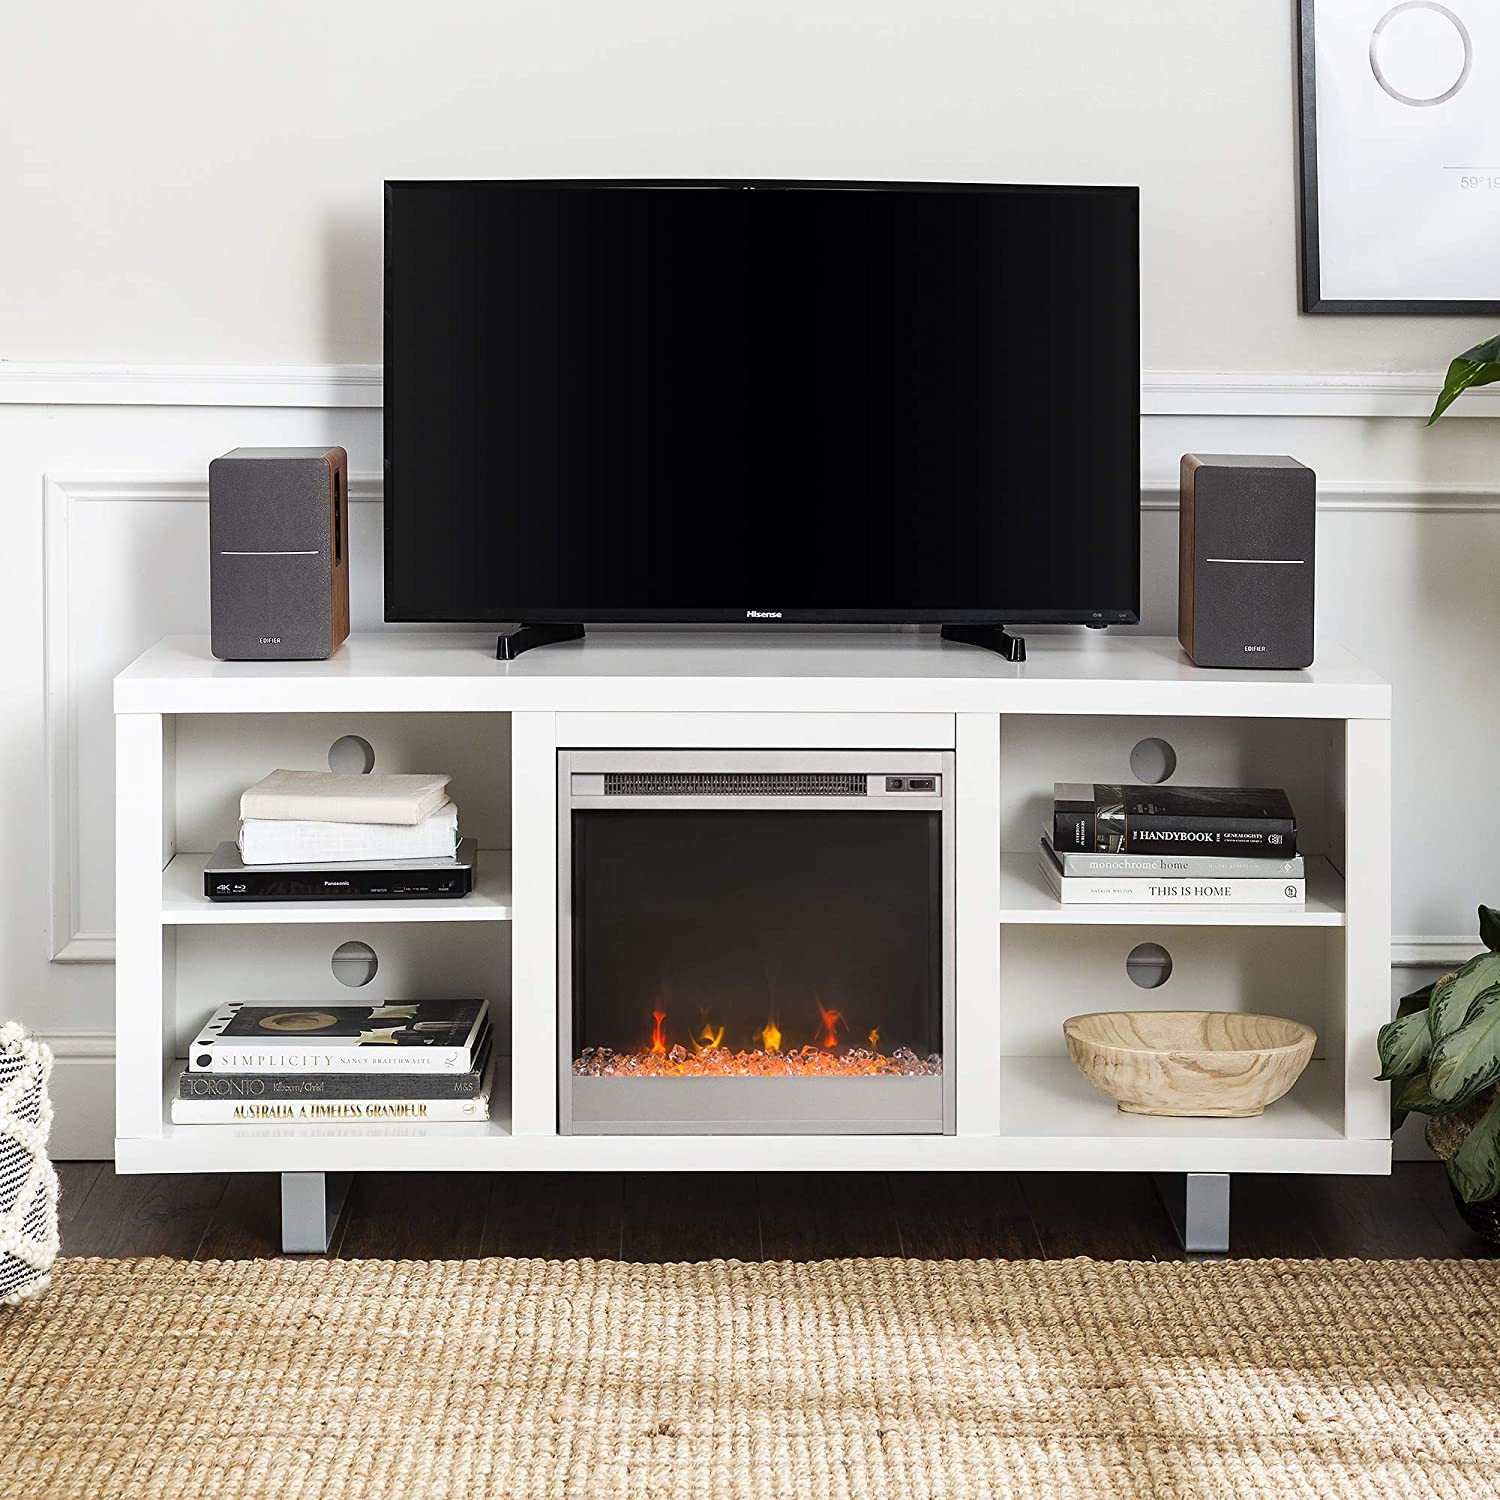 Walker Edison Modern Wood and Metal Fireplace TV Stand for TV's up to 64" Flat Screen Living Room Storage Shelves Entertainment Center, 58 Inch, White  $224